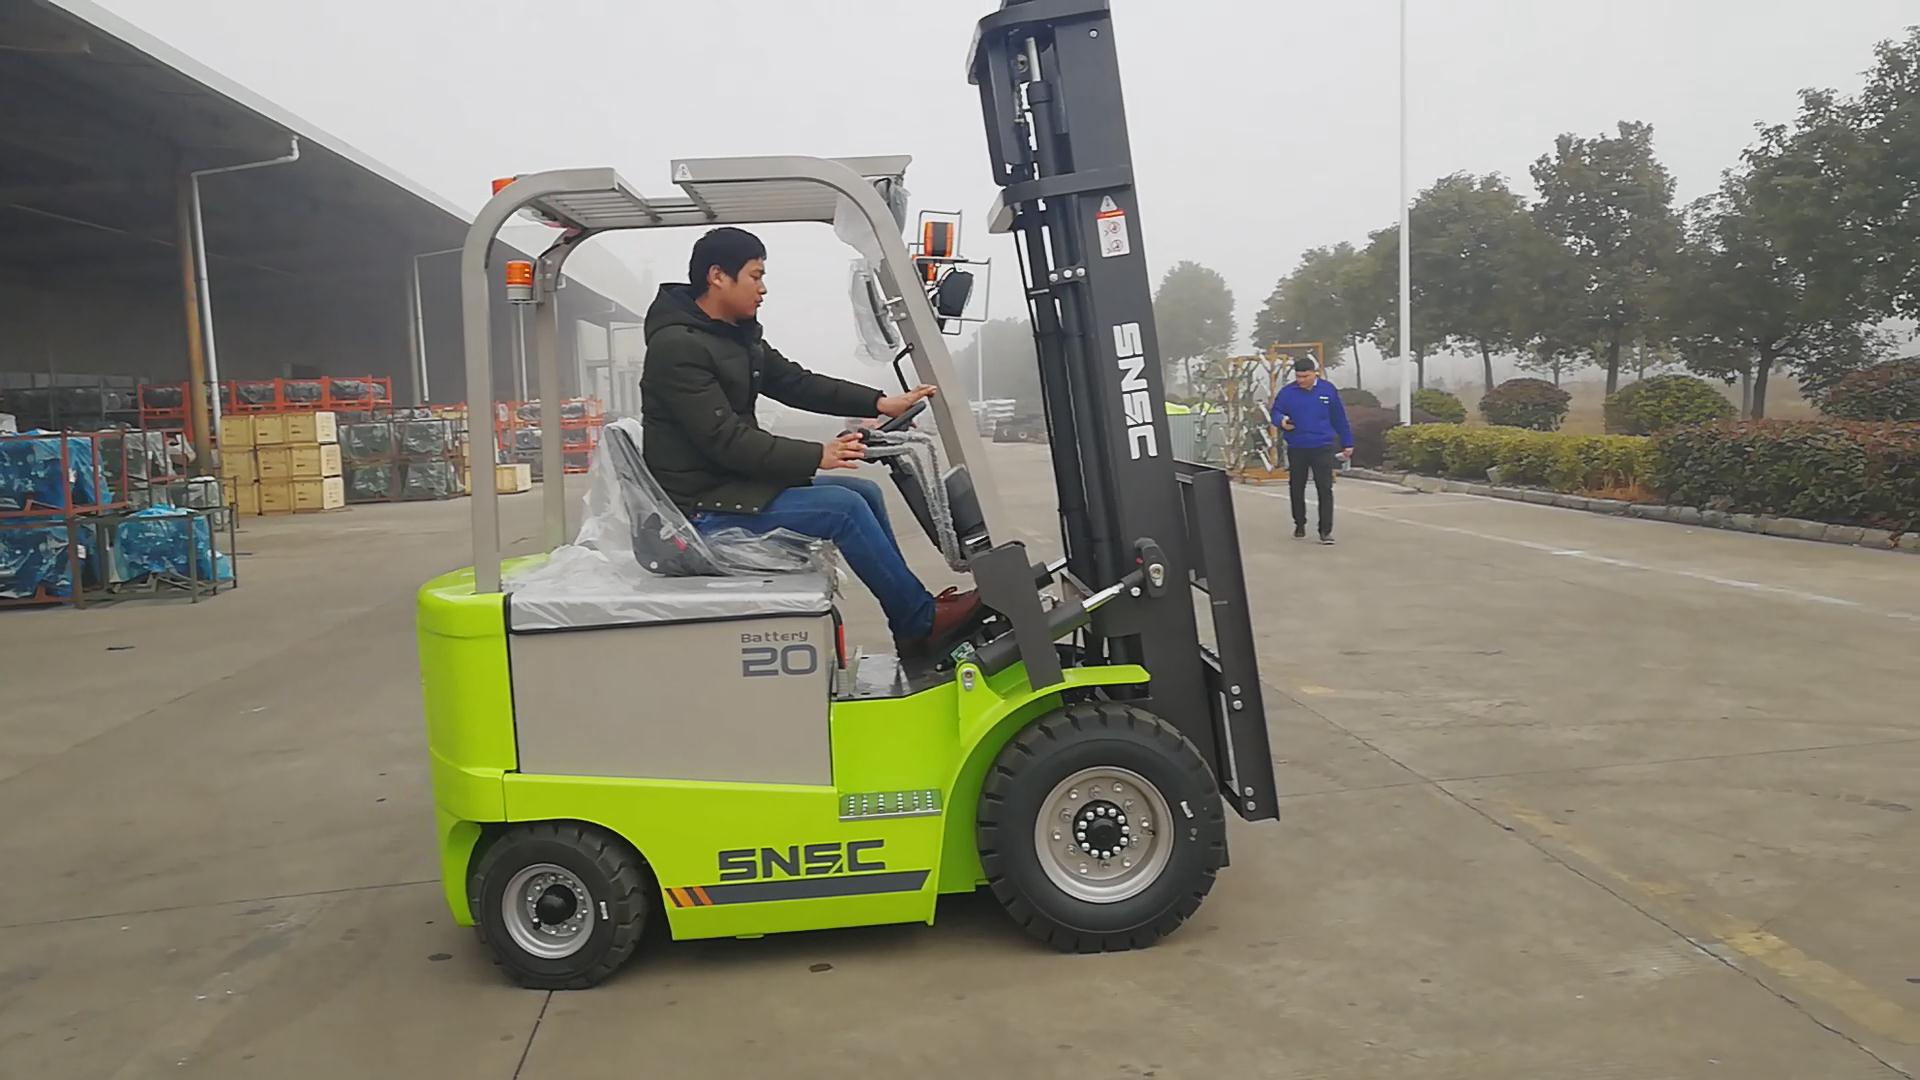 SNSC FB20 2T Electric Forklift to Thailand